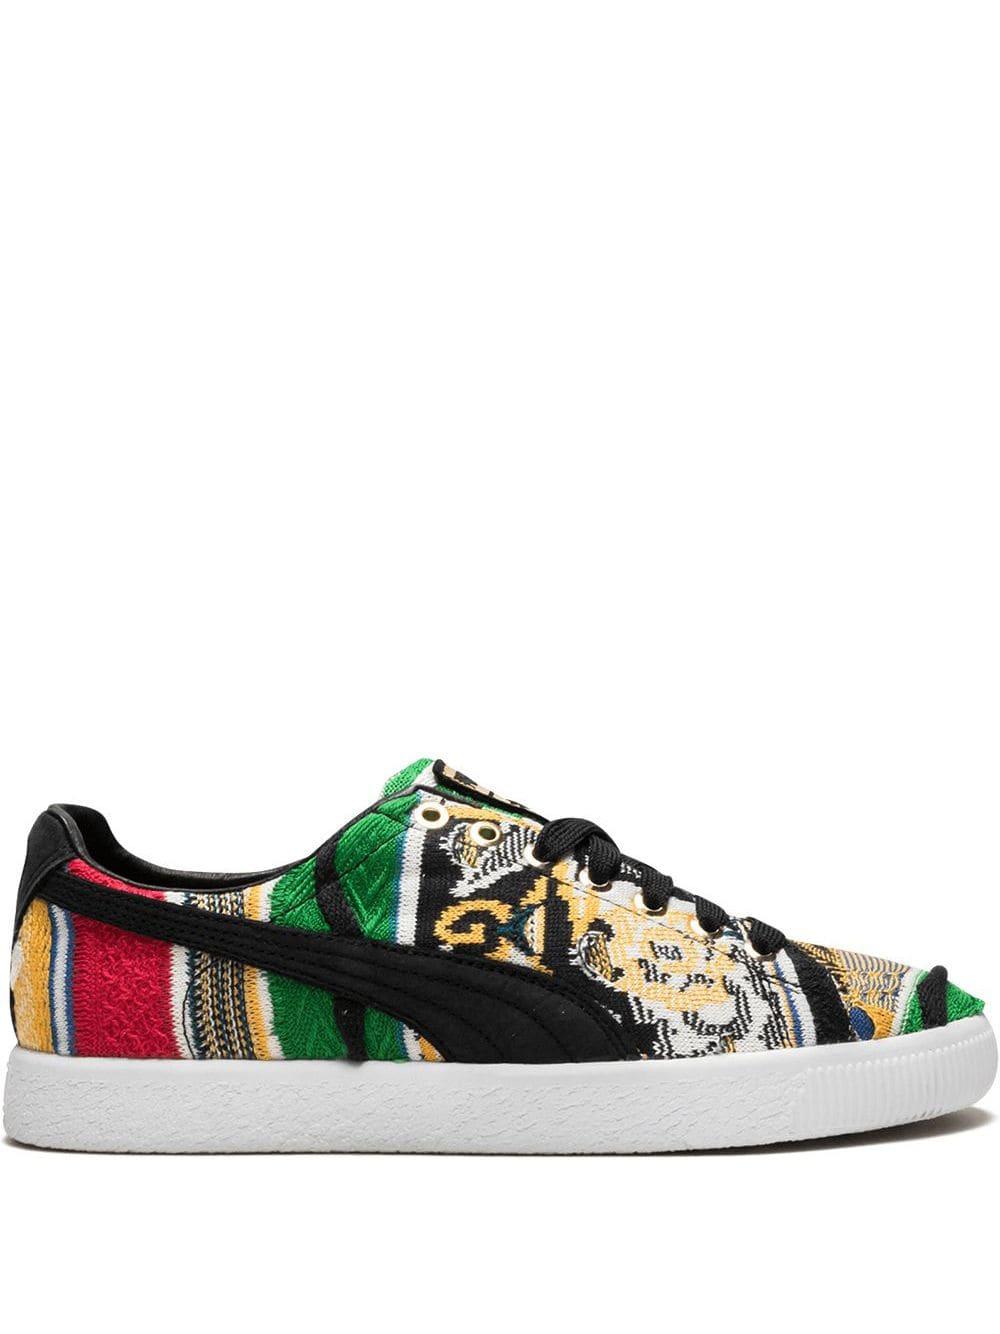 PUMA Clyde Coogi Sneakers in Yellow for Men | Lyst